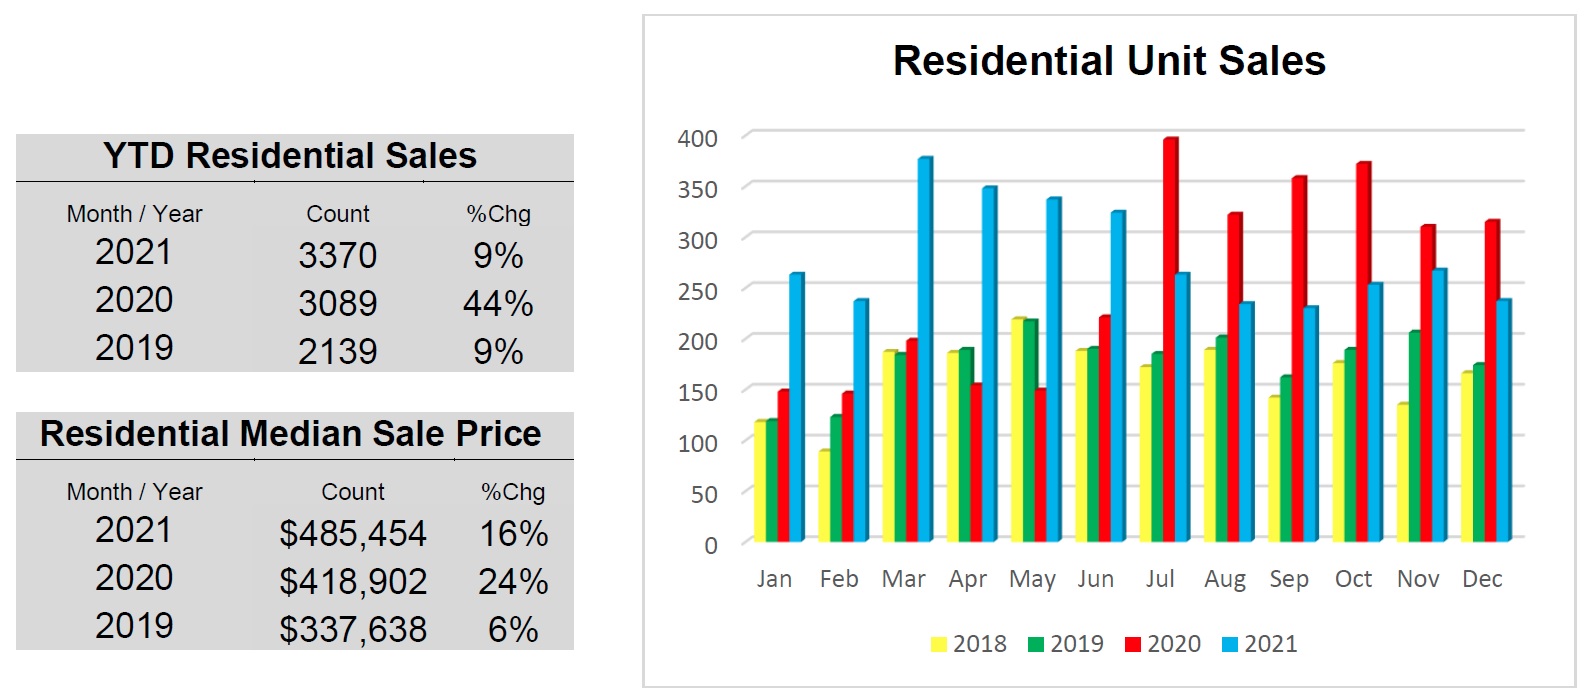 Obx Real Estate Residential Unit Sales 